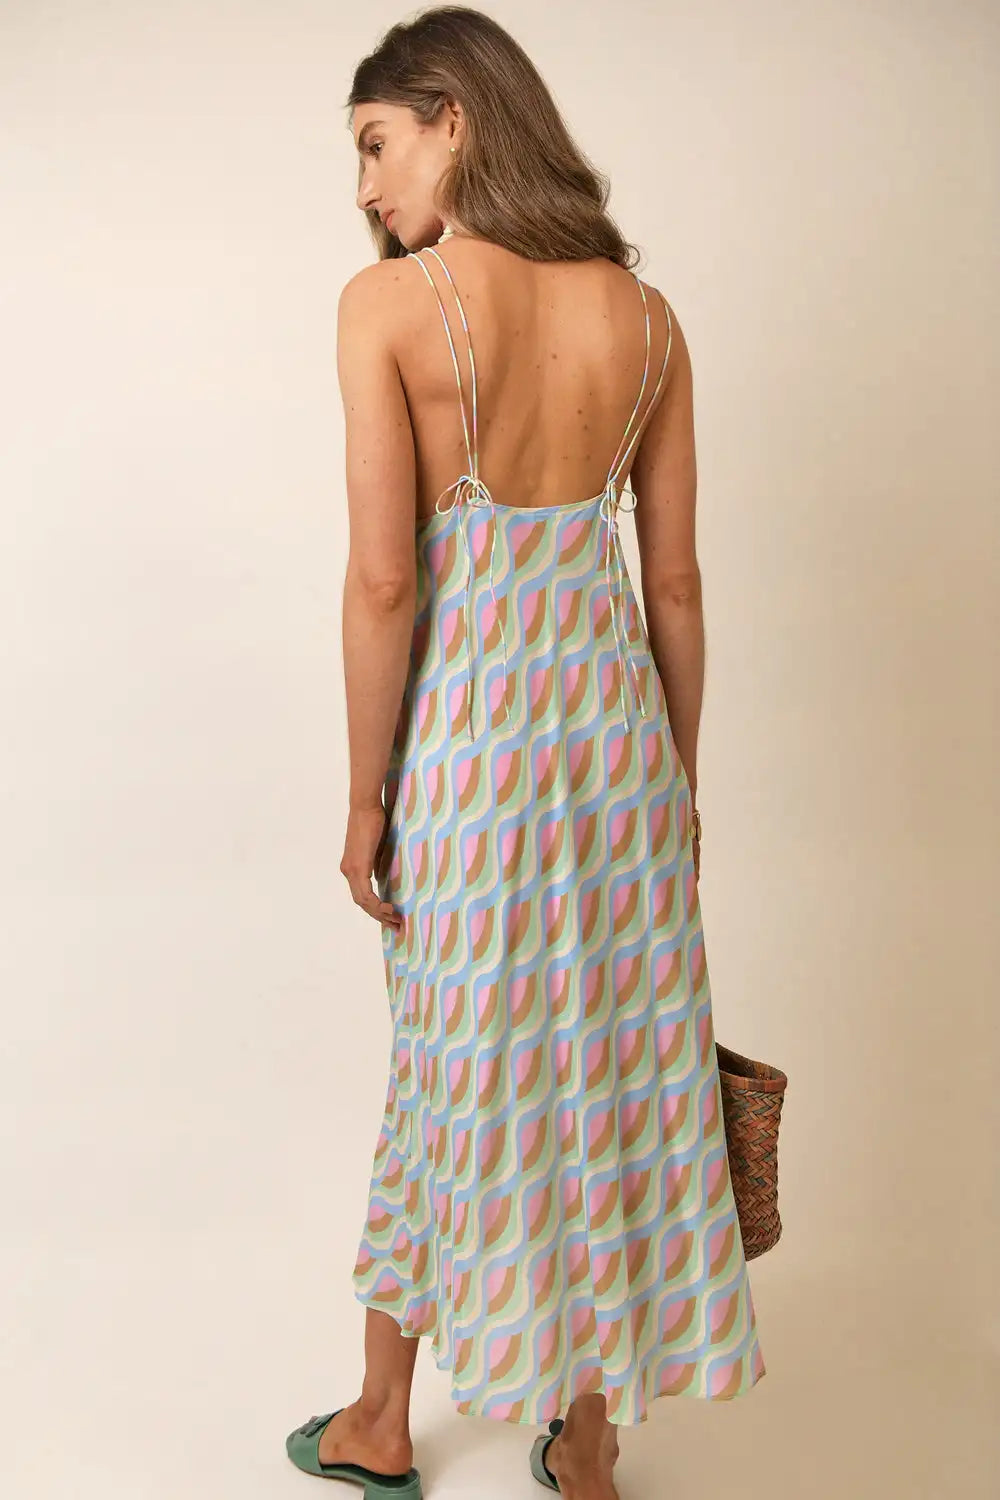 Introducing the RIXO Dress, a high-quality designer dress with a printed skirt. Handmade with precision and care, this dress features a long sling design and needle and thread detail. Elevate your wardrobe with this stylish and unique piece.